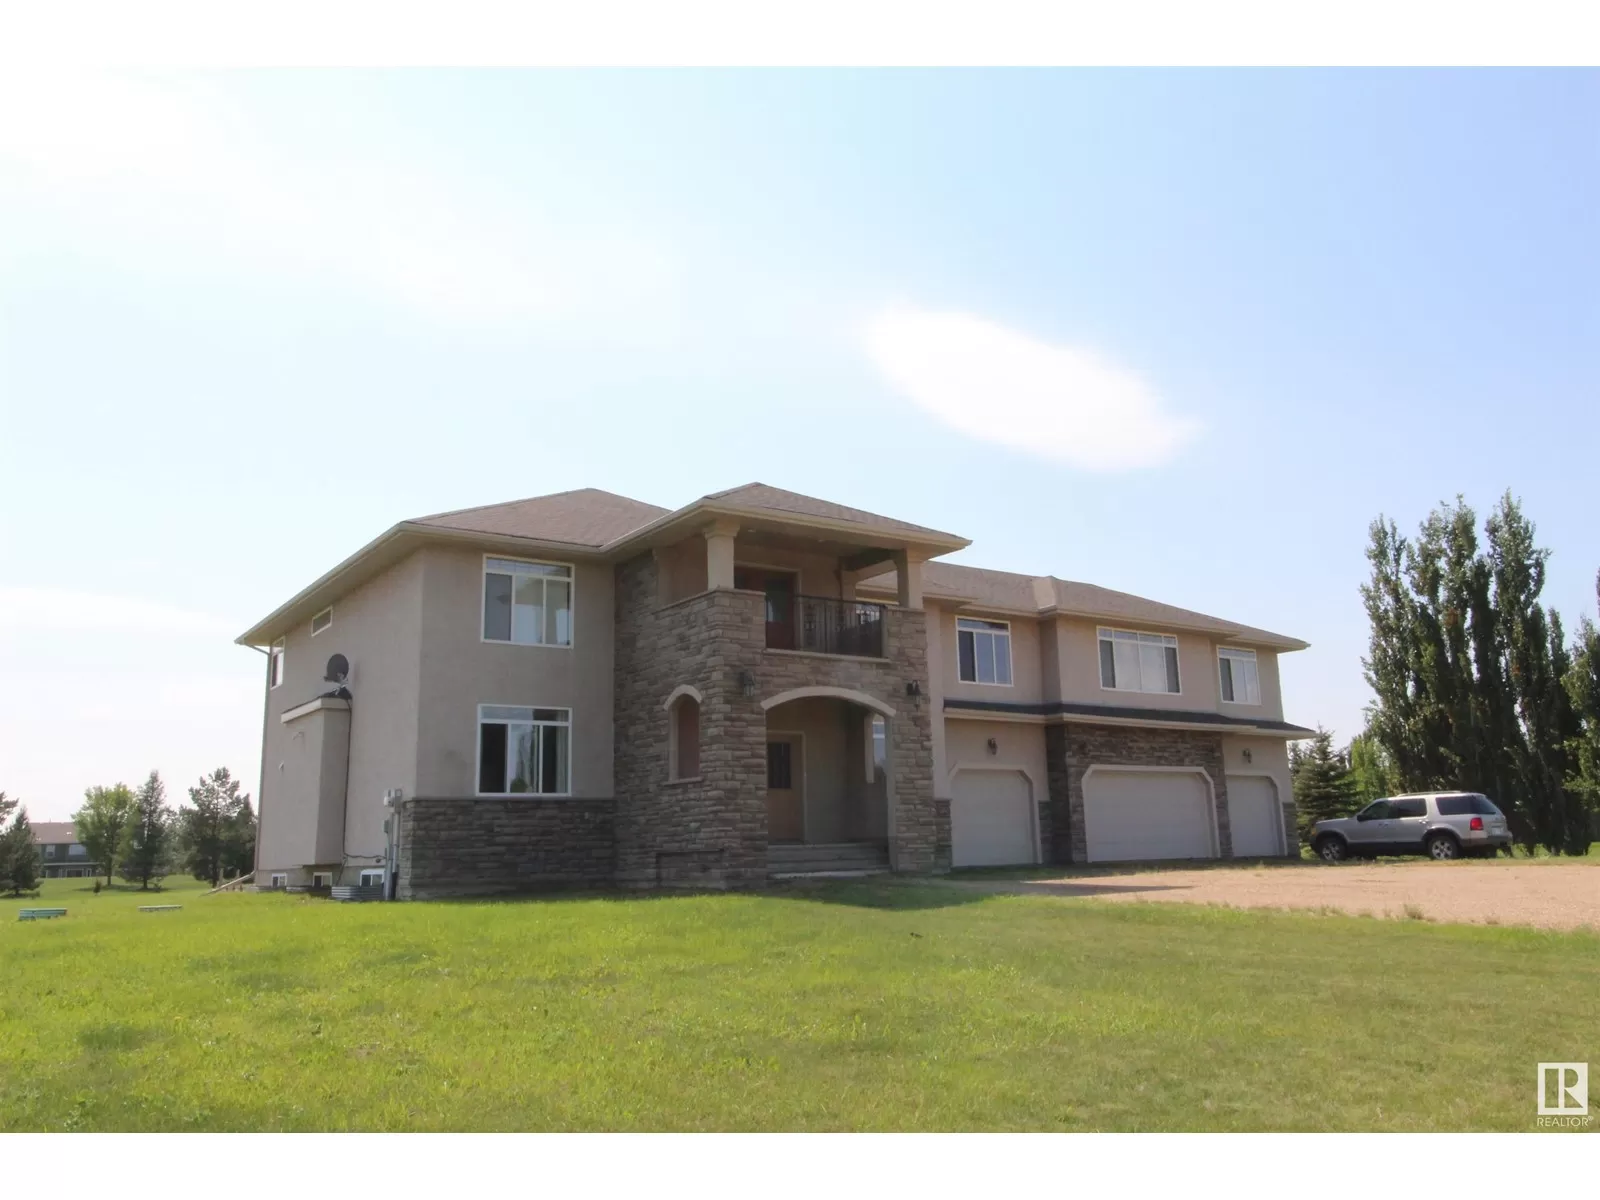 House for rent: #229 52477 Hwy 21 Nw Nw, Rural Strathcona County, Alberta T8H 2Y3